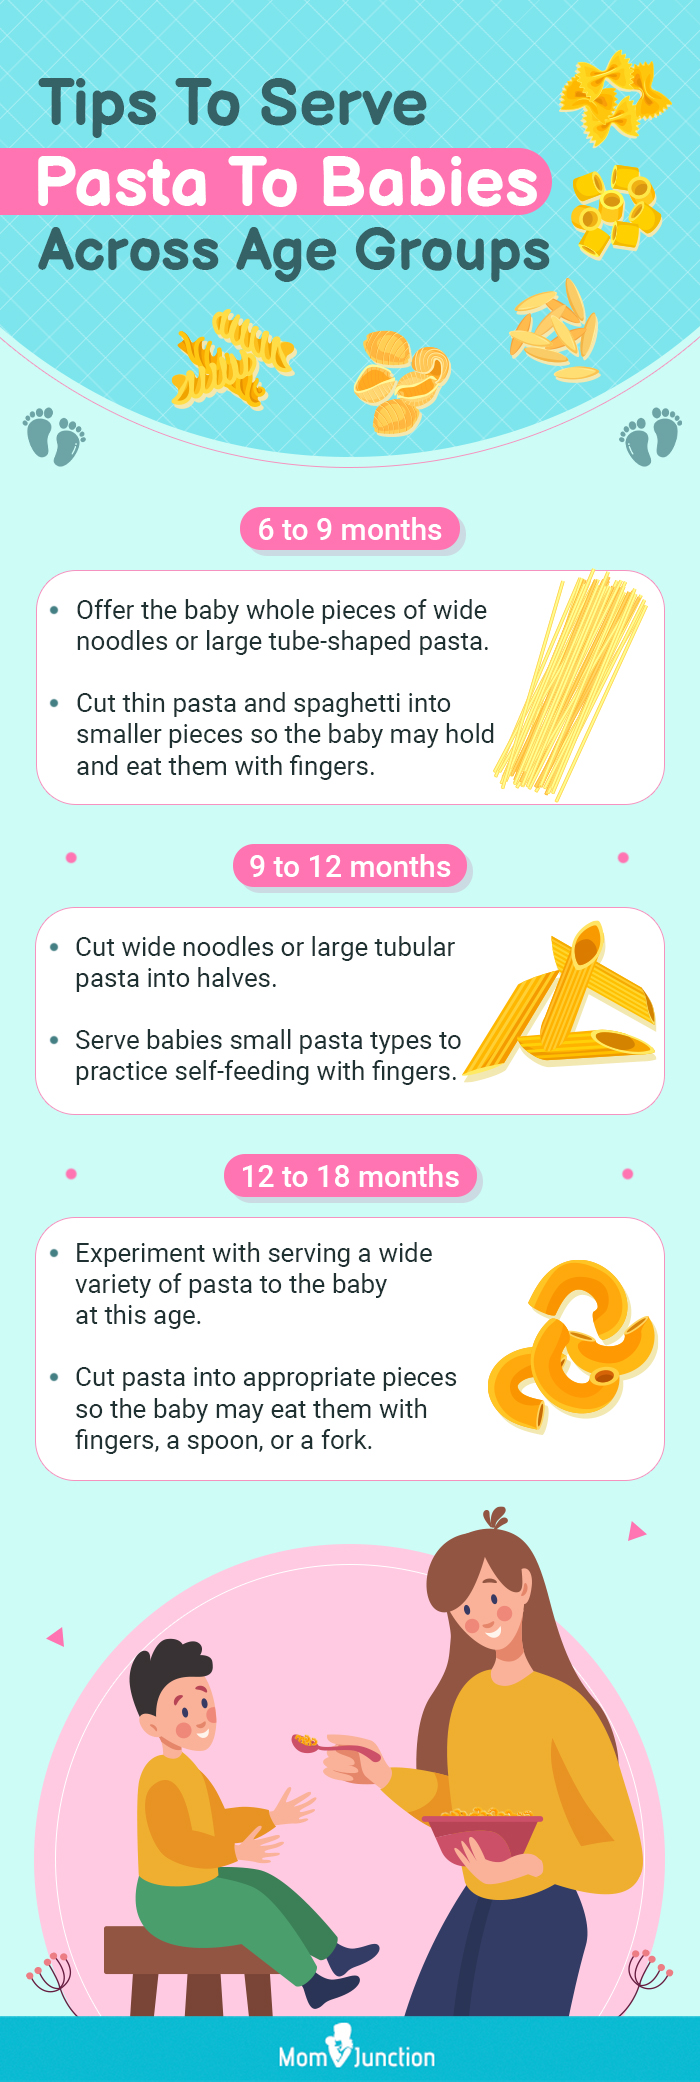 Pasta For Babies: Right Age, Benefits And 7 Recipes To Try